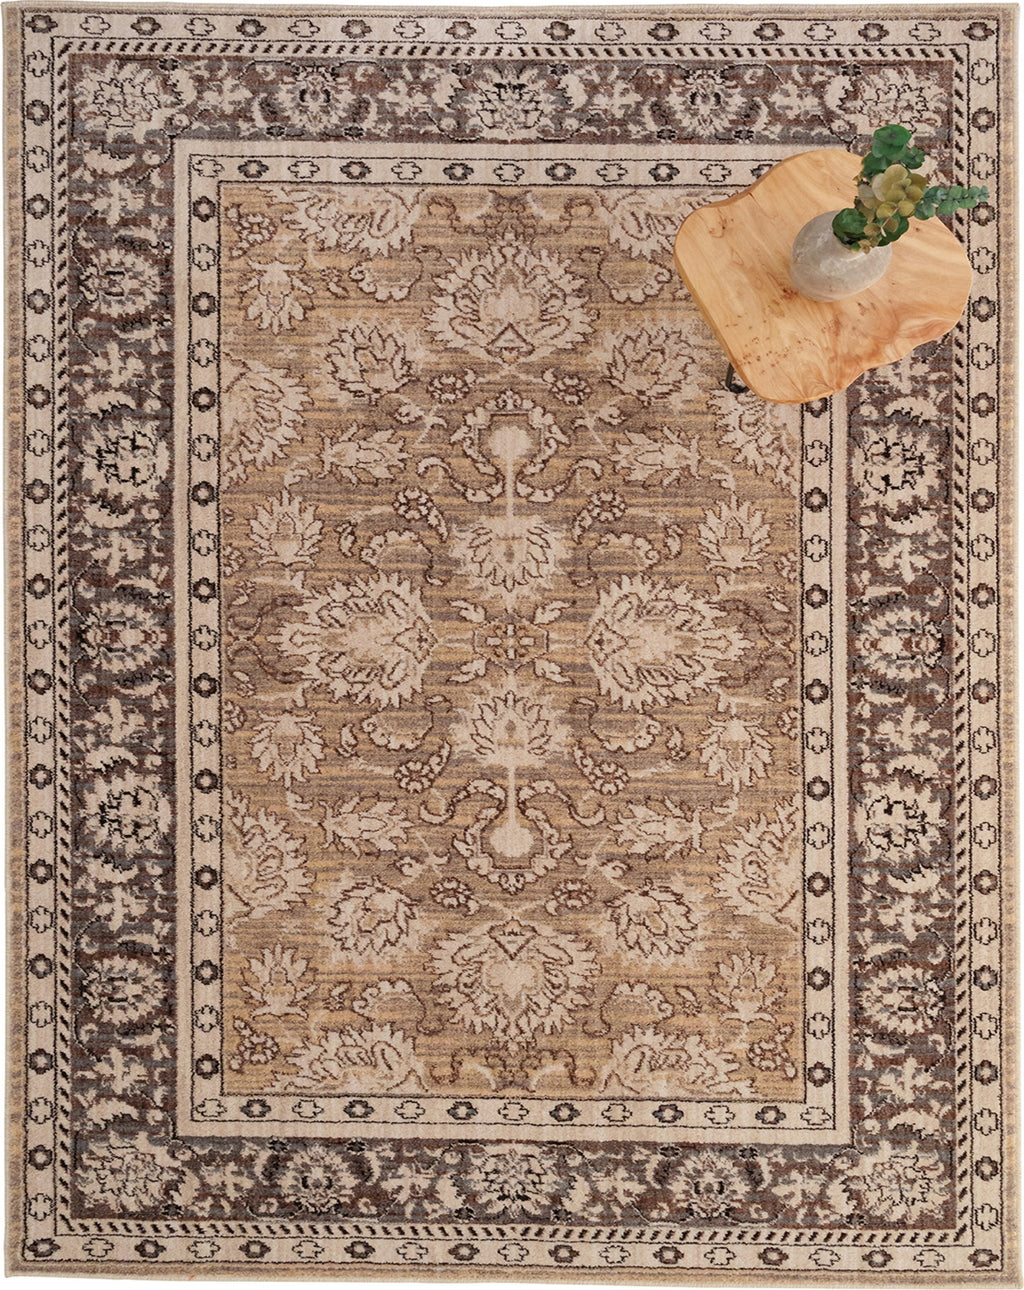 Capel Thrace-Keshan 4403 Tan Area Rug Rectangle Roomshot Image 1 Feature